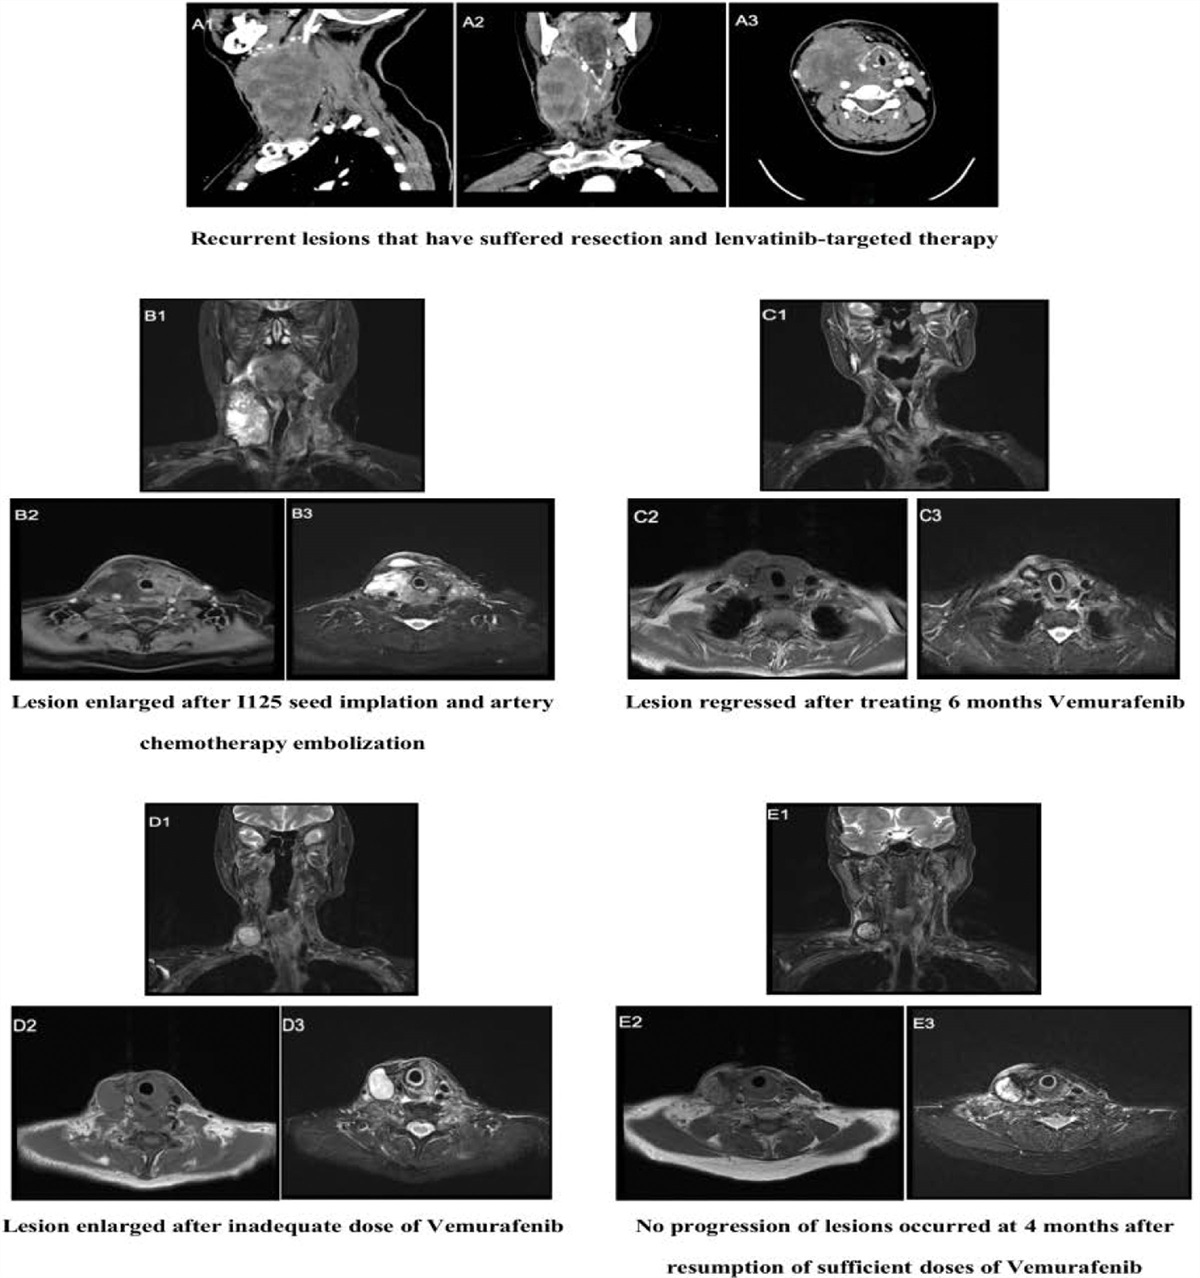 Clinical responses to vemurafenib in postoperative recurrence of papillary thyroid carcinoma with esophageal fistula: A case report